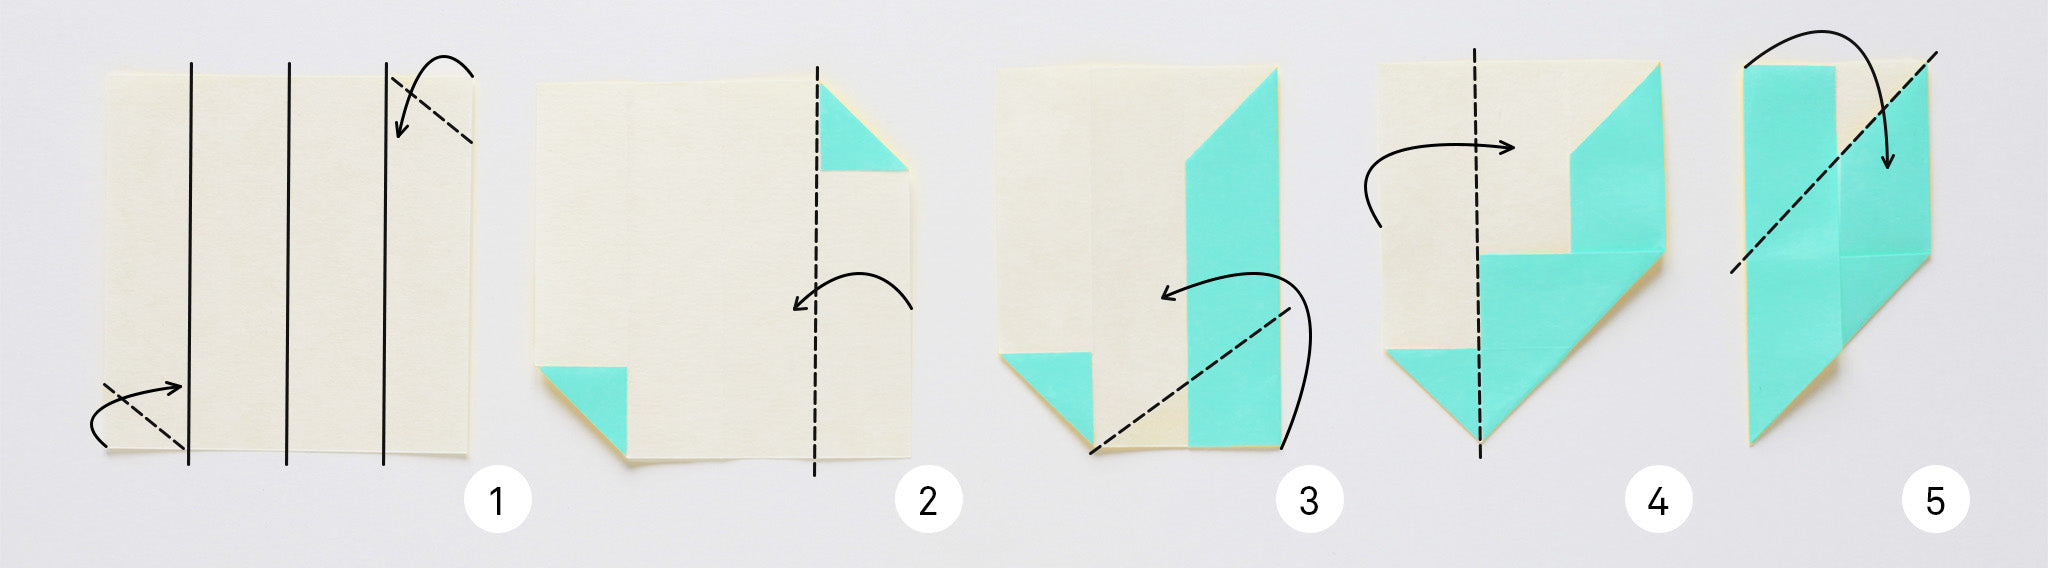 article-tutorial-cube-origami-hanging-folding-elements-step-1-5